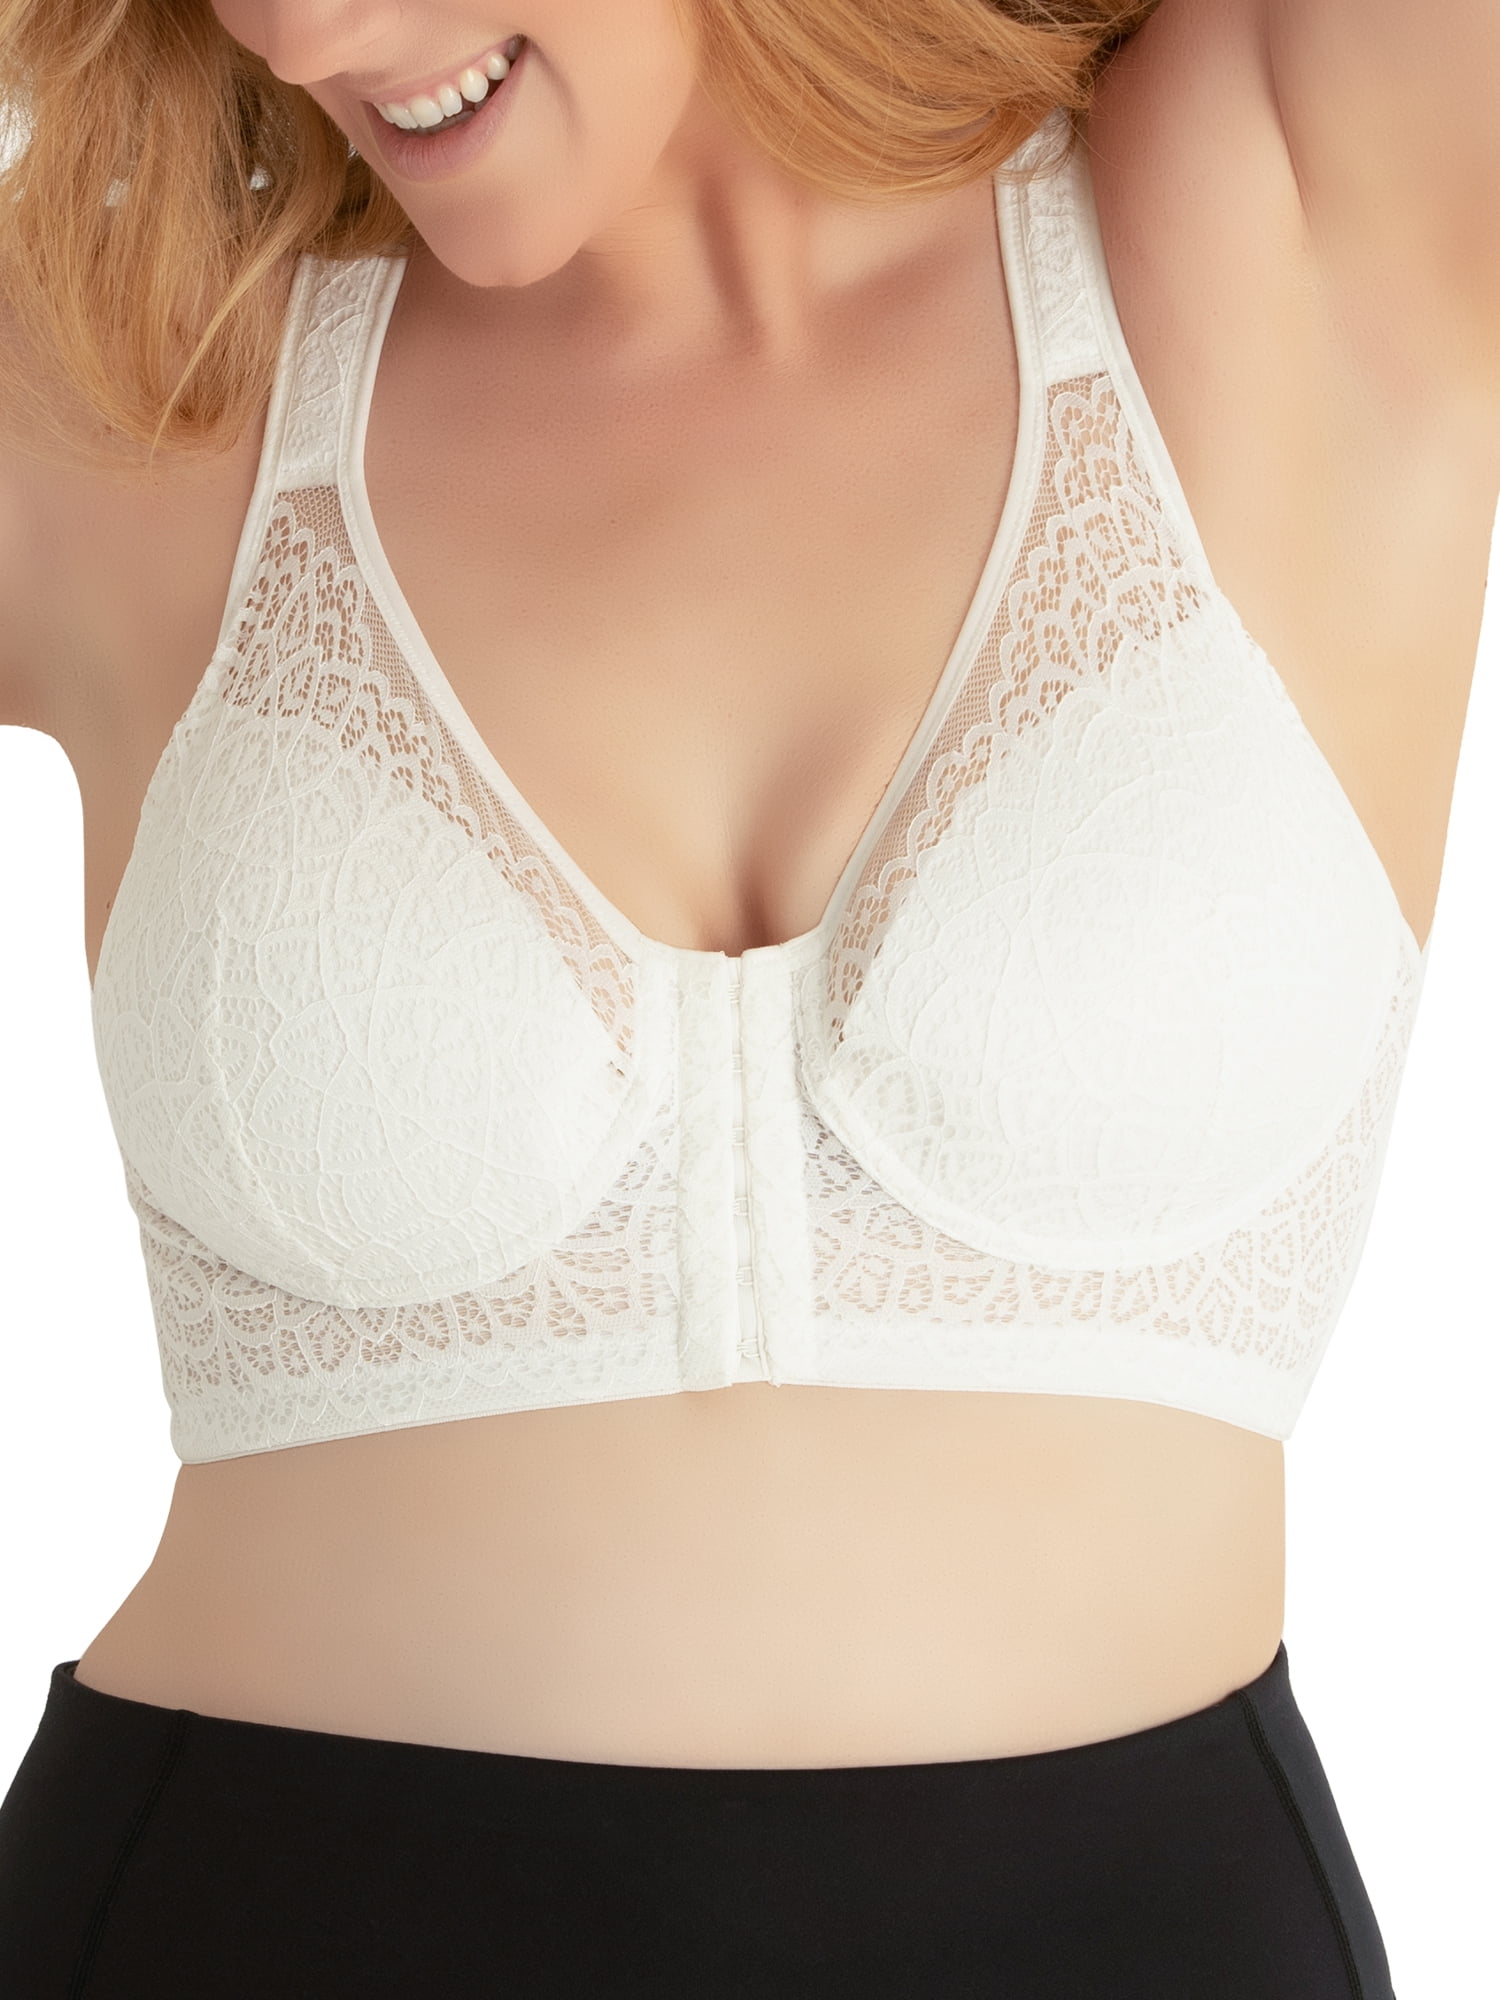 LEADING LADY The Nora Lace Front Closure Support Bra - Back Support Bras  for Women - Wireless Full Support Lace Bra Plus Size